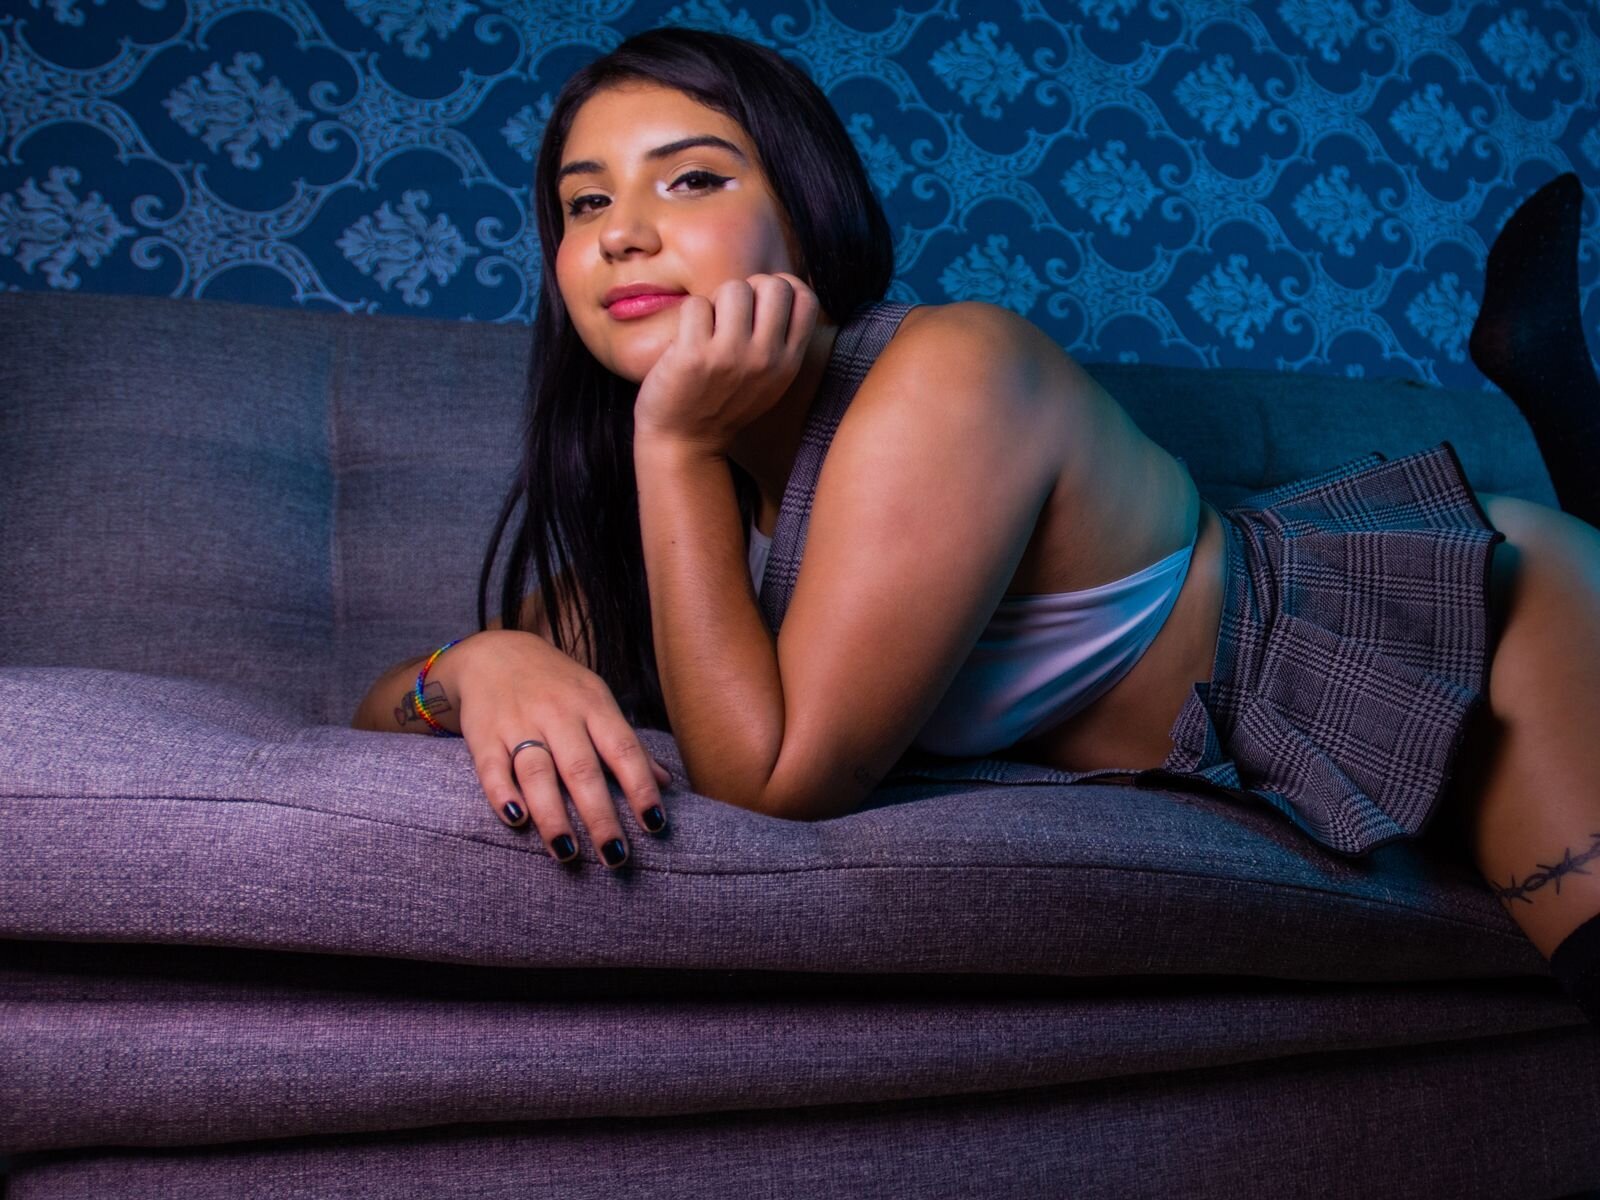 Free Live Sex Chat With StephaniaAlarcon